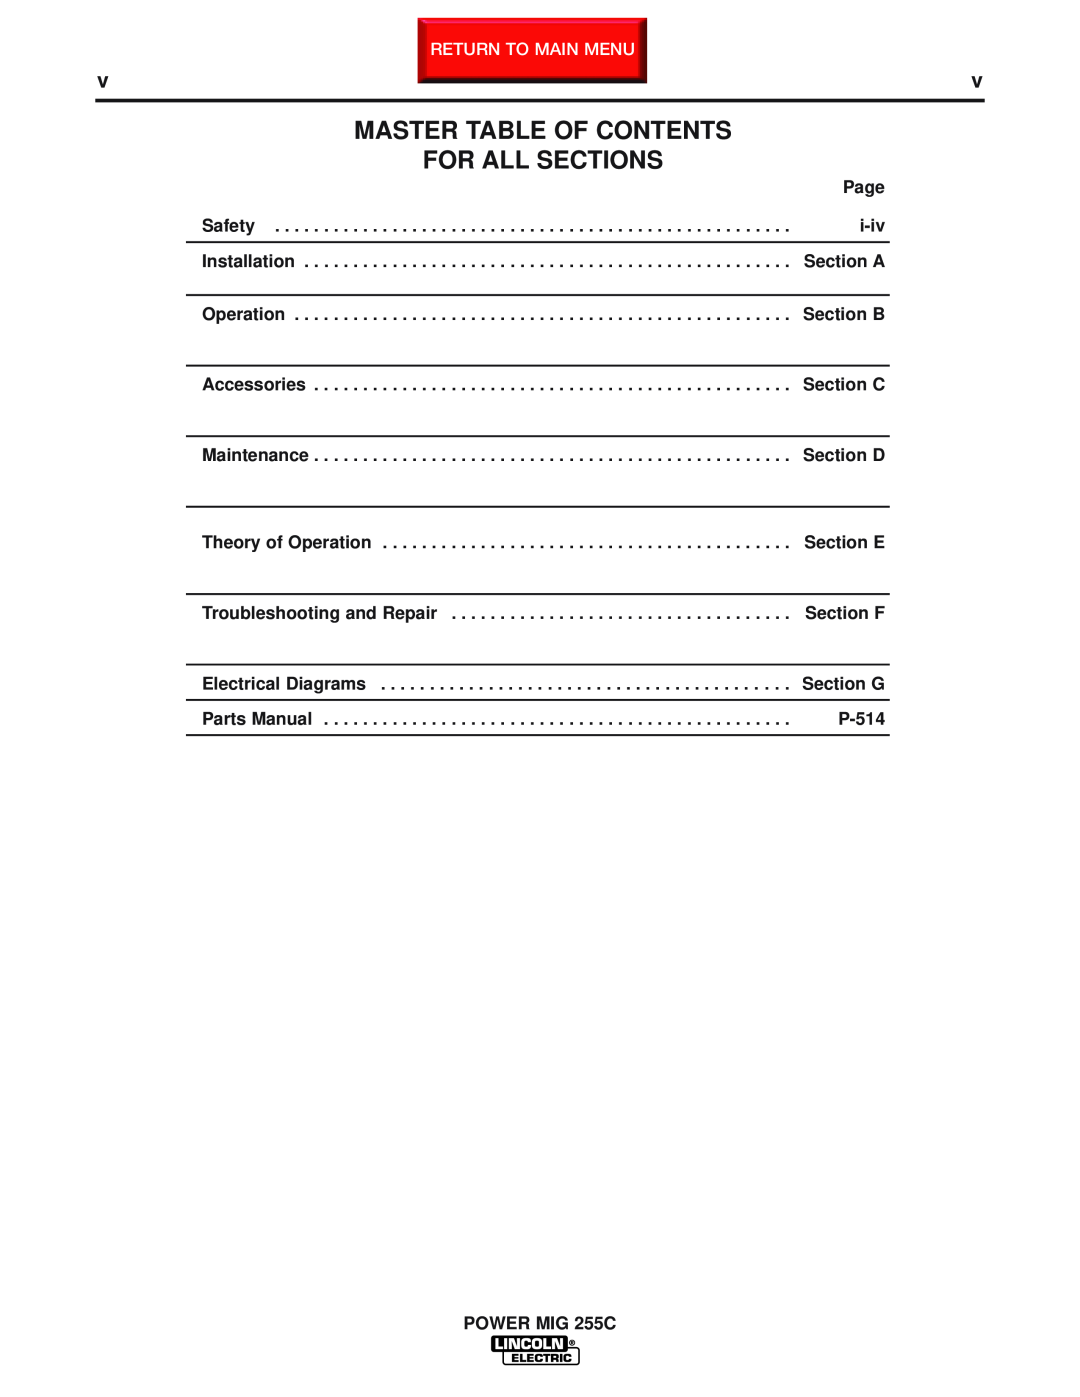 Lincoln Electric SVM170-A service manual Master Table Of Contents For All Sections, Return To Main Menu 